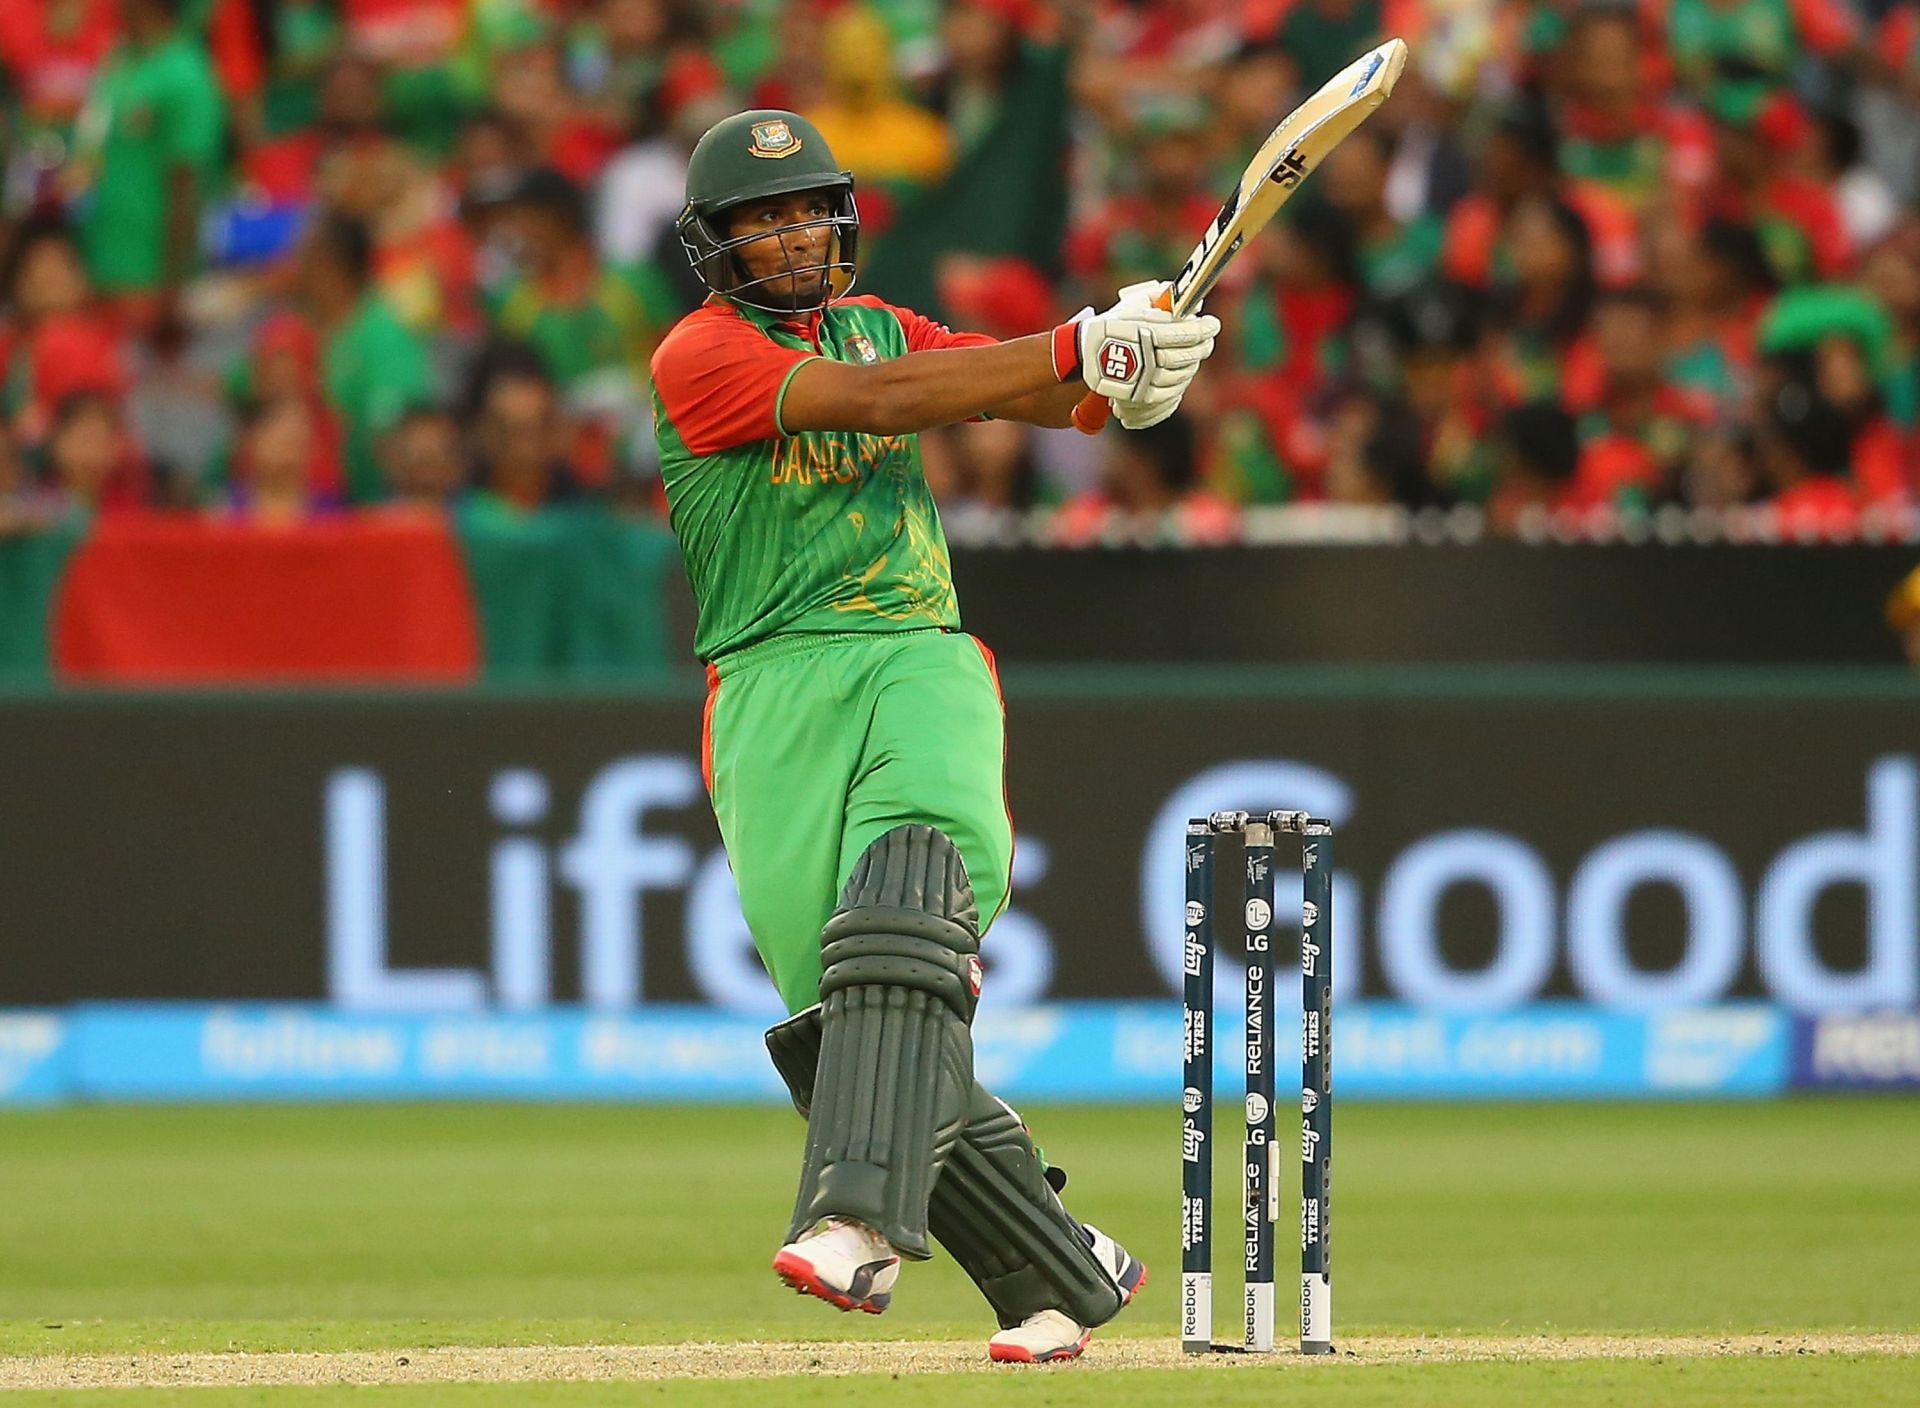 Mahmudullah will be the player to watch out for in the T20 World Cup match between Bangladesh and Sri Lanka.